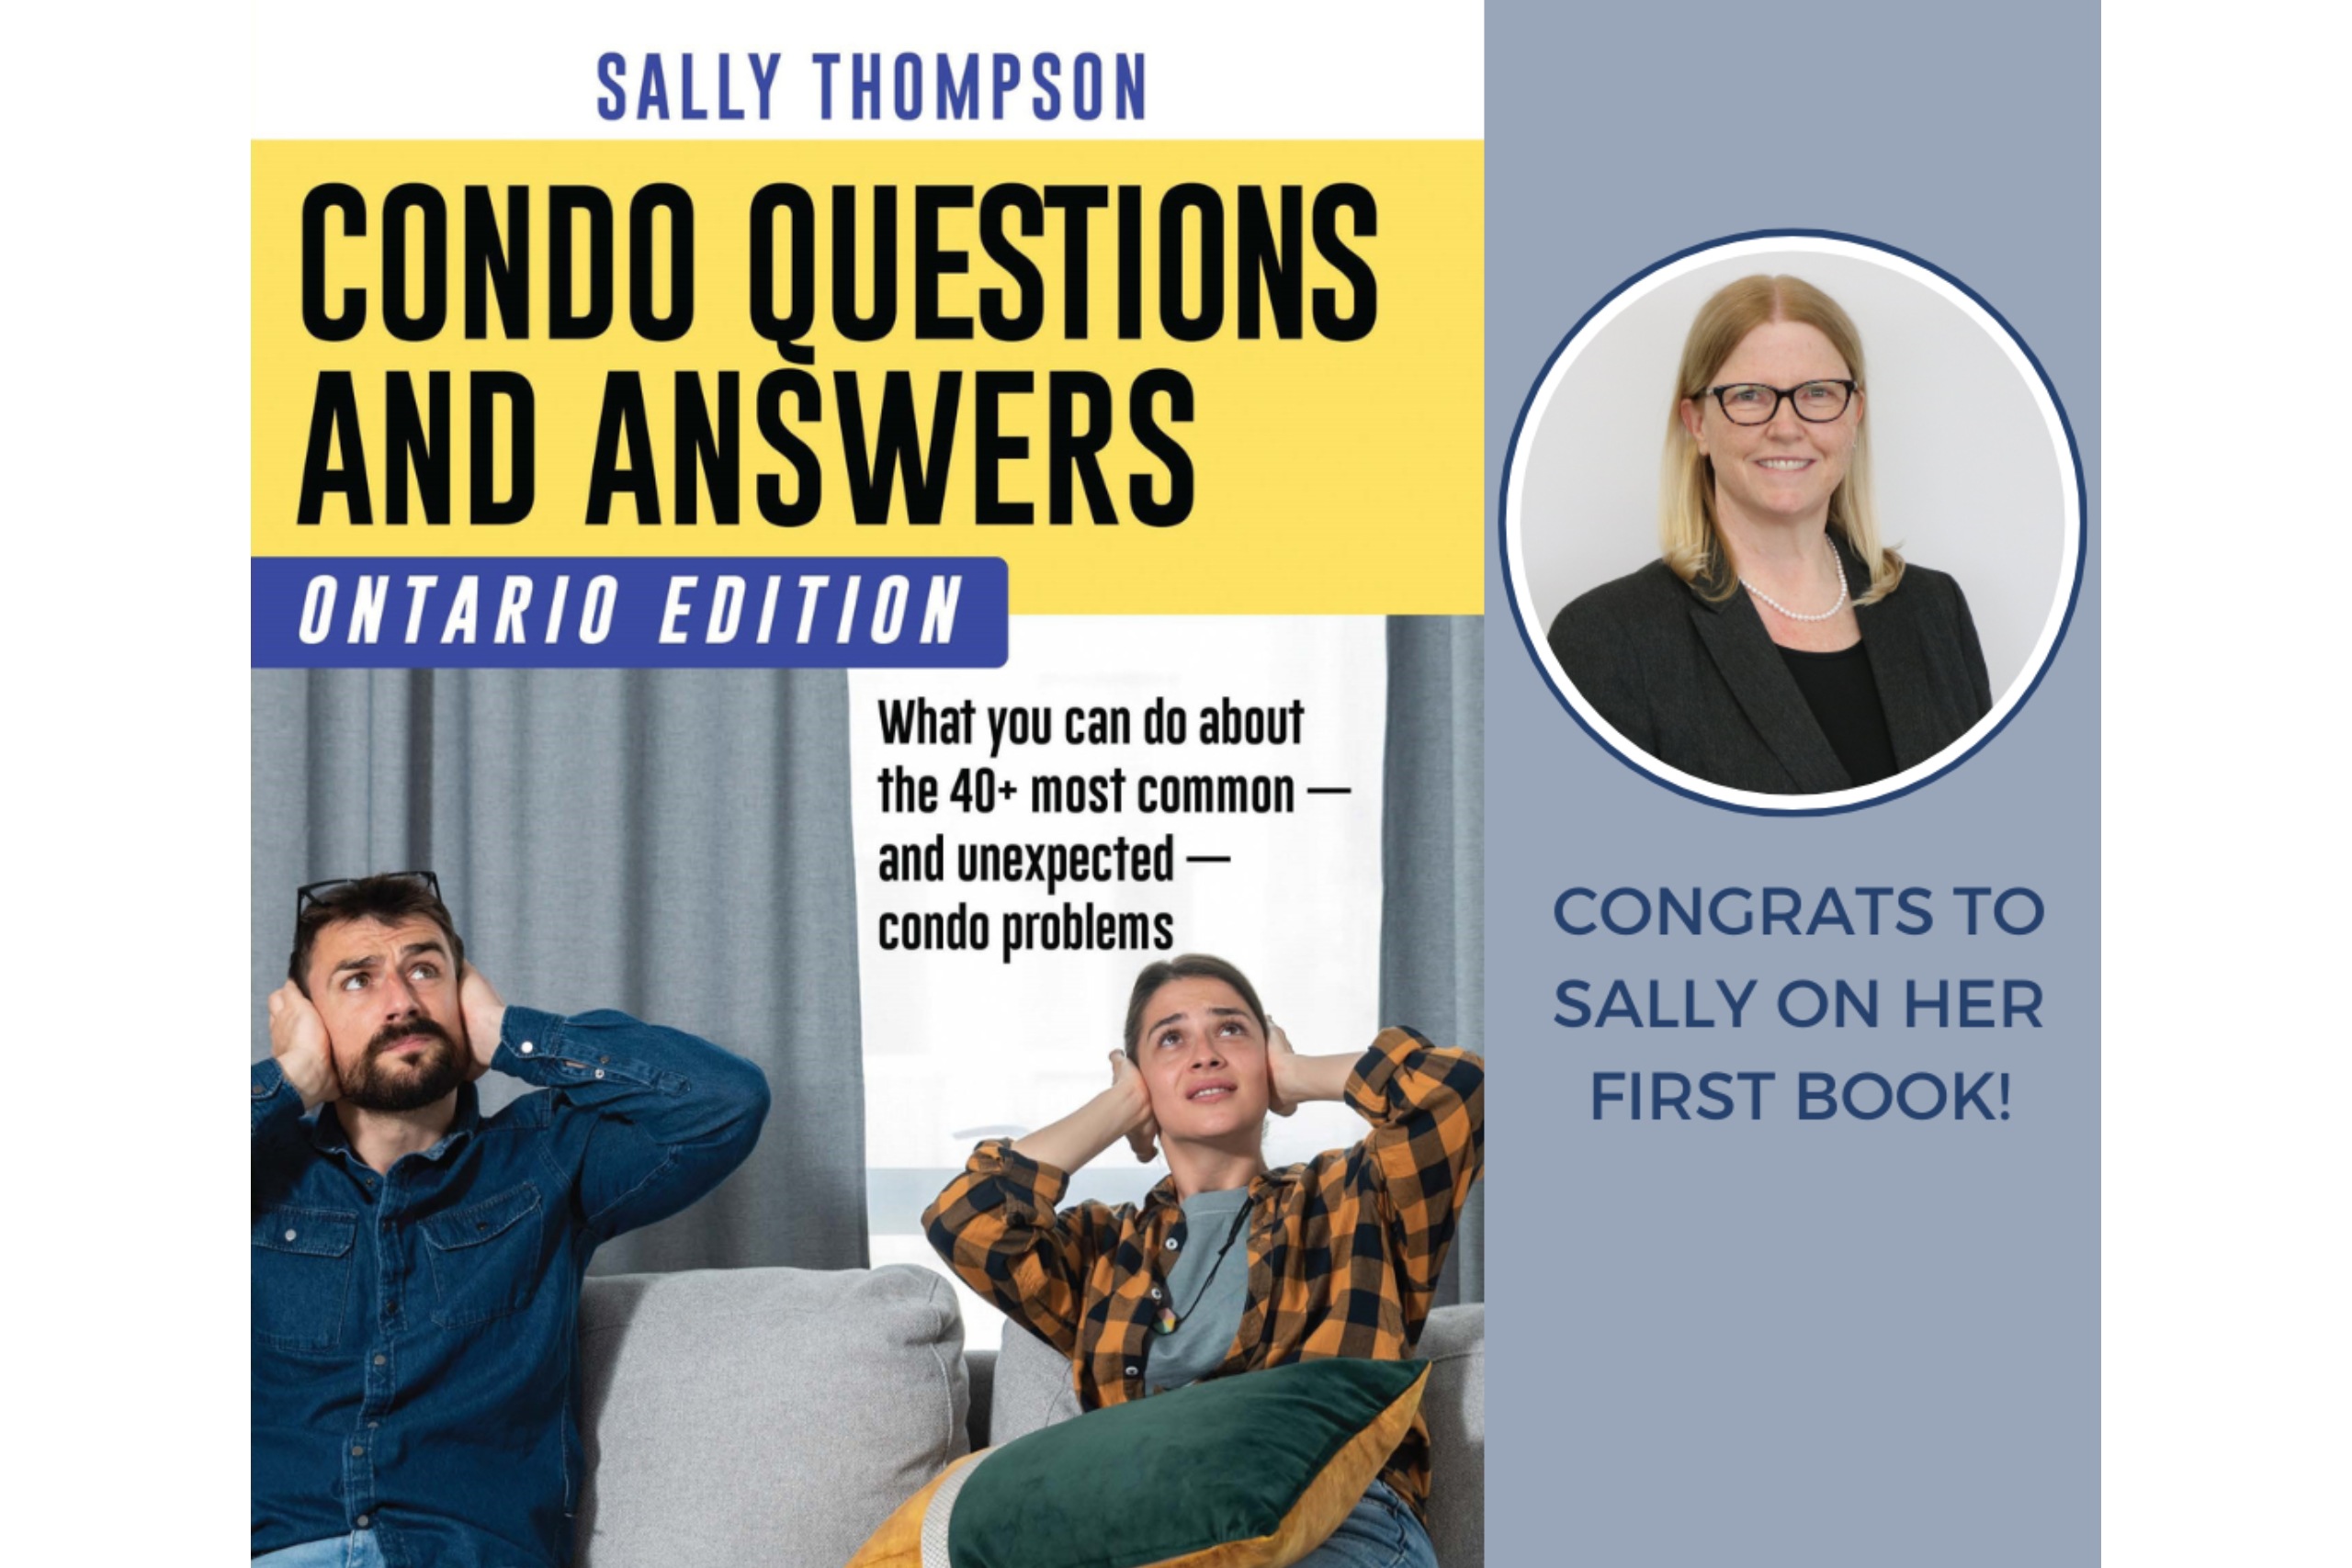 Congratulations to Sally Thompson on the release of her first book, Condo Questions and Answers: Ontario Edition.